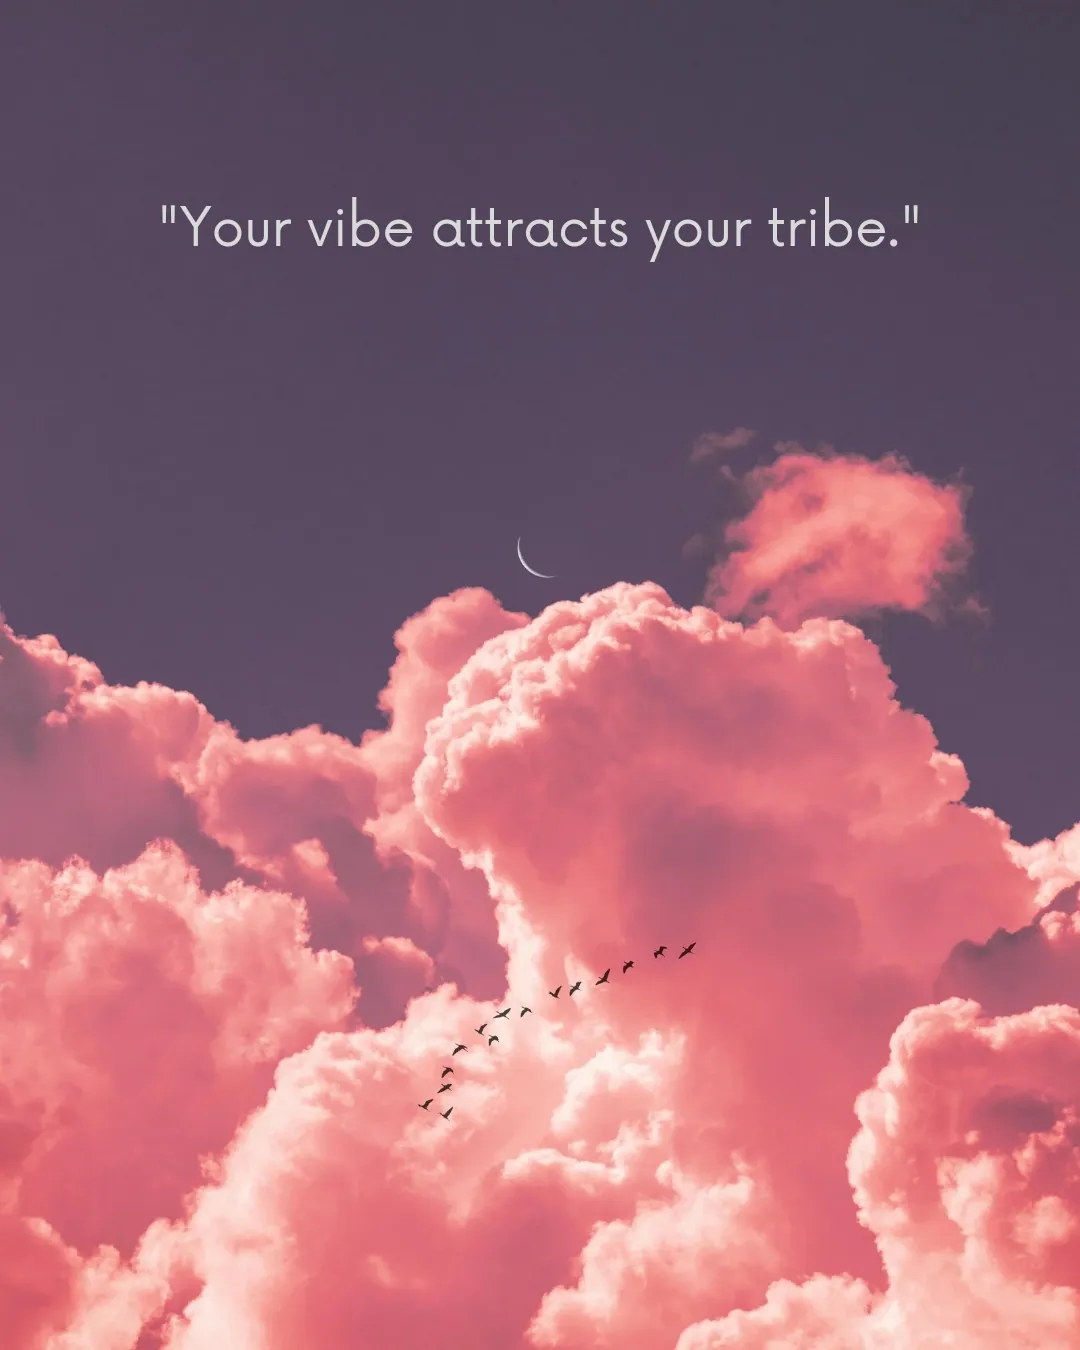 Positive Vibes Quotes for Instagram 1